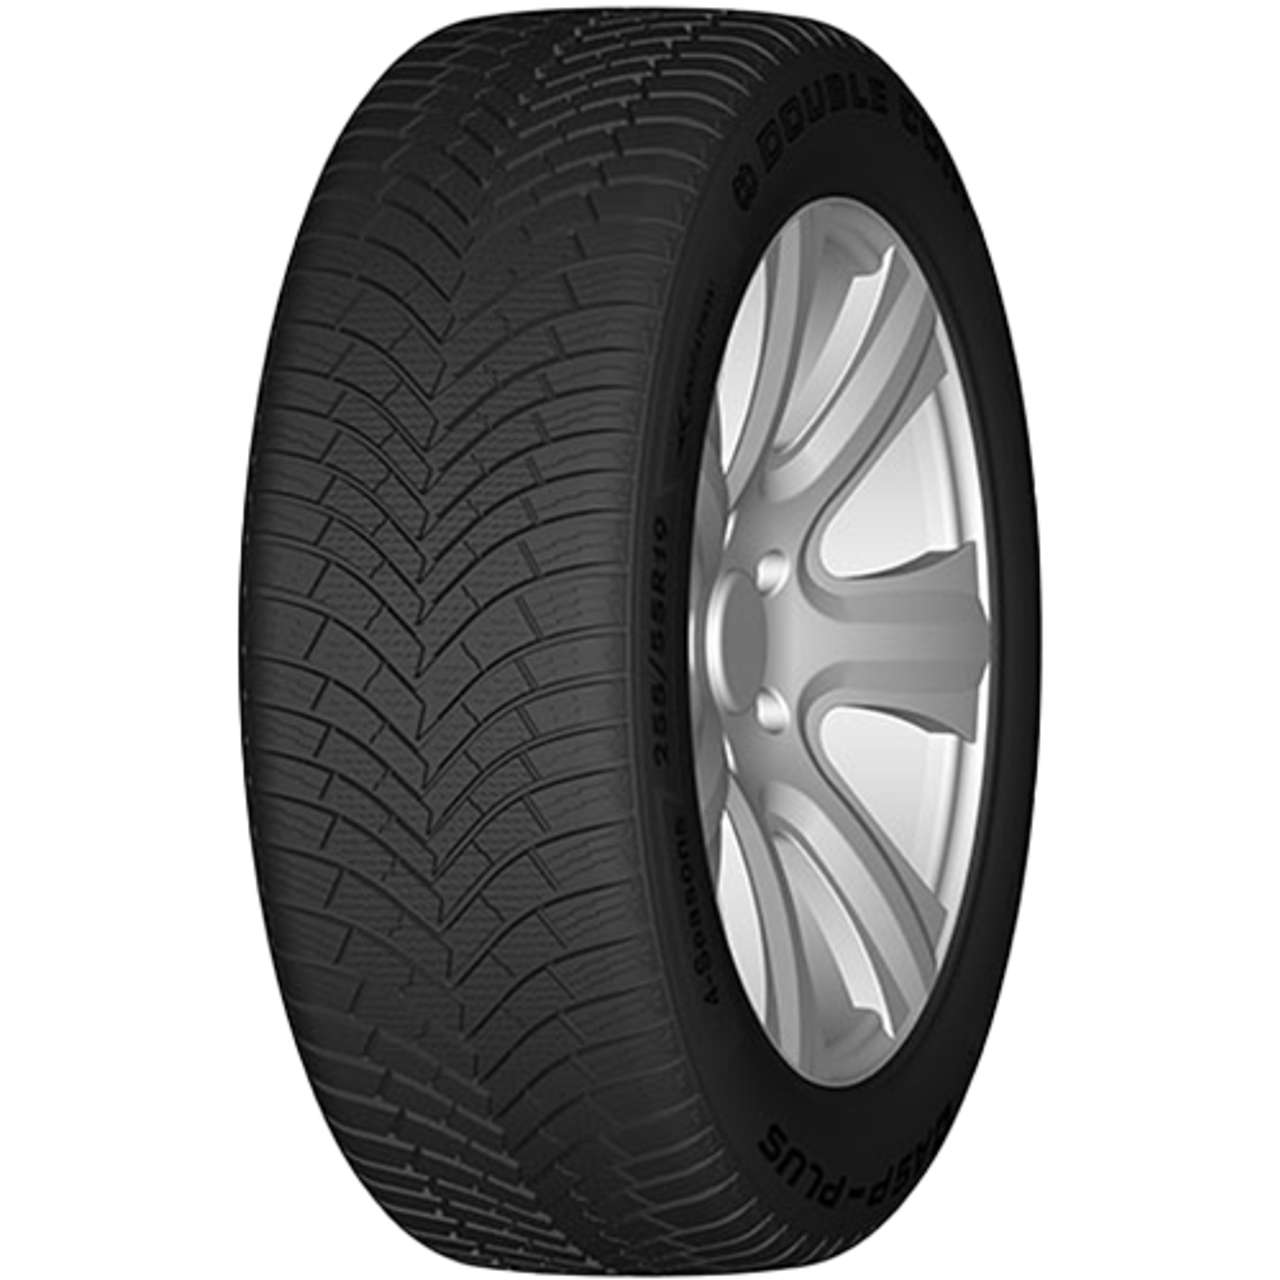 DOUBLE COIN DASP+ 205/45R16 87V BSW XL